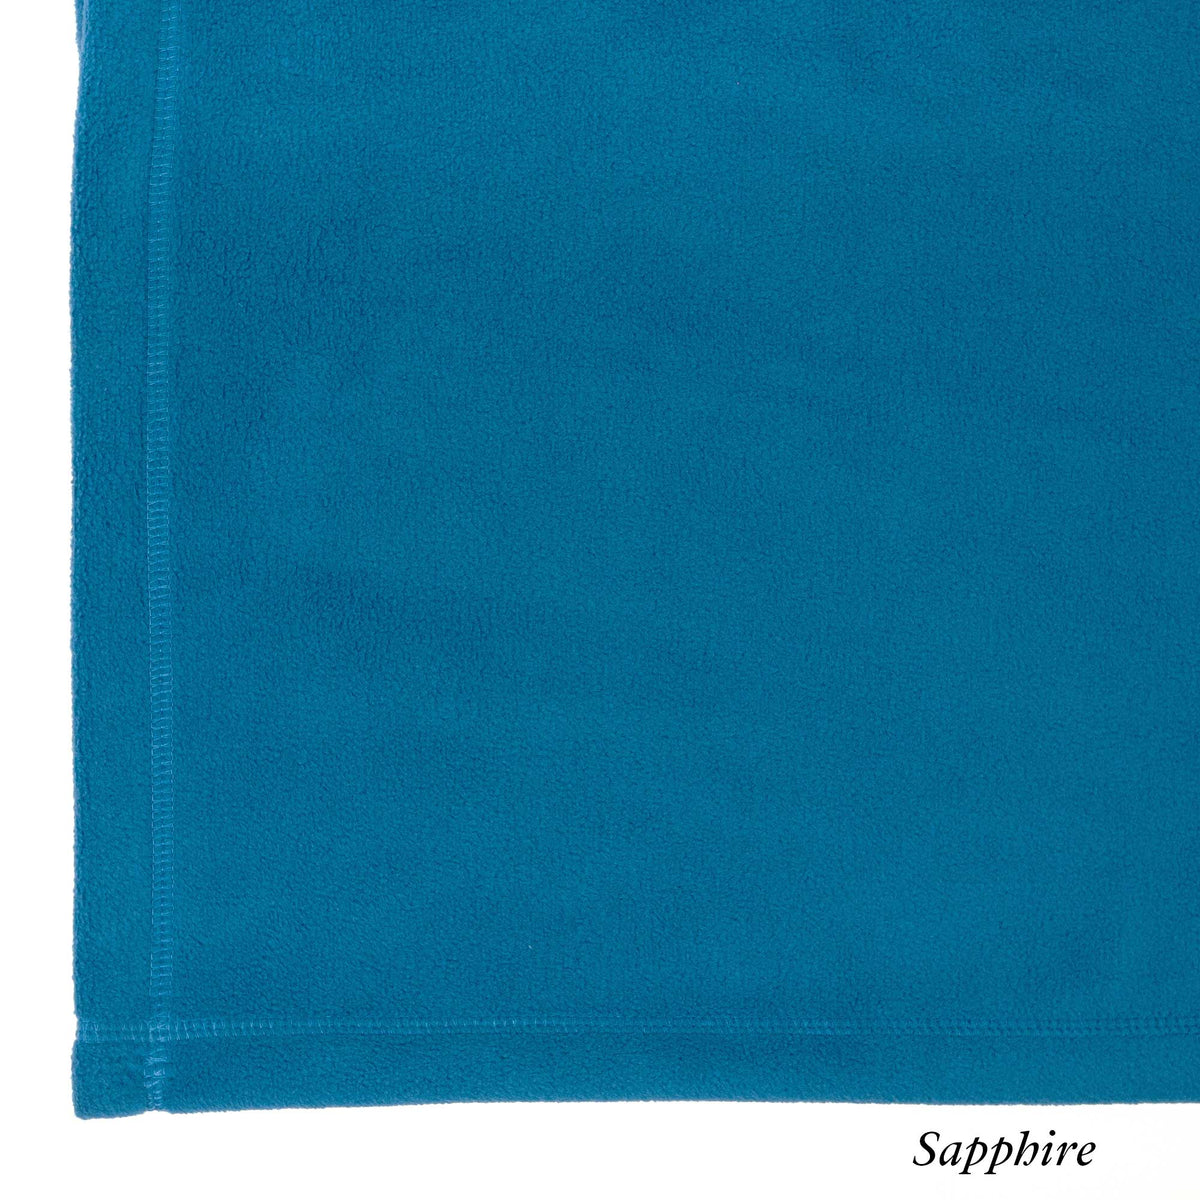 Sapphire Swatch - Fleece Pillowcase - Peaceful Touch - American Blanket Company